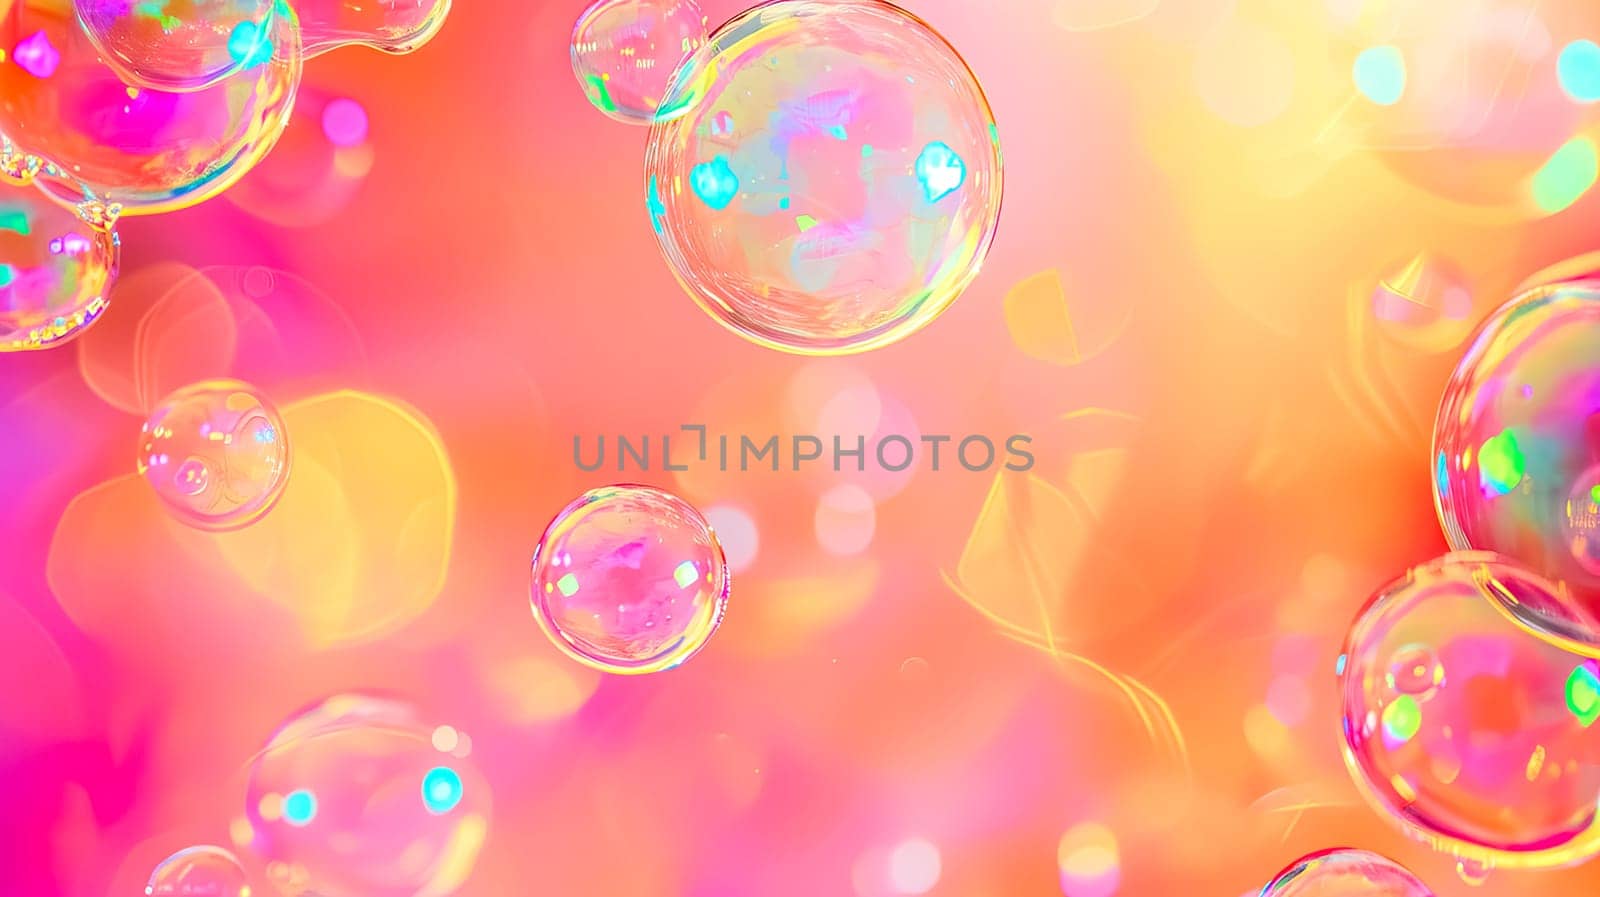 Vibrant and Colorful Soap Bubbles Floating on a Dreamy Pink Iridescent Background.